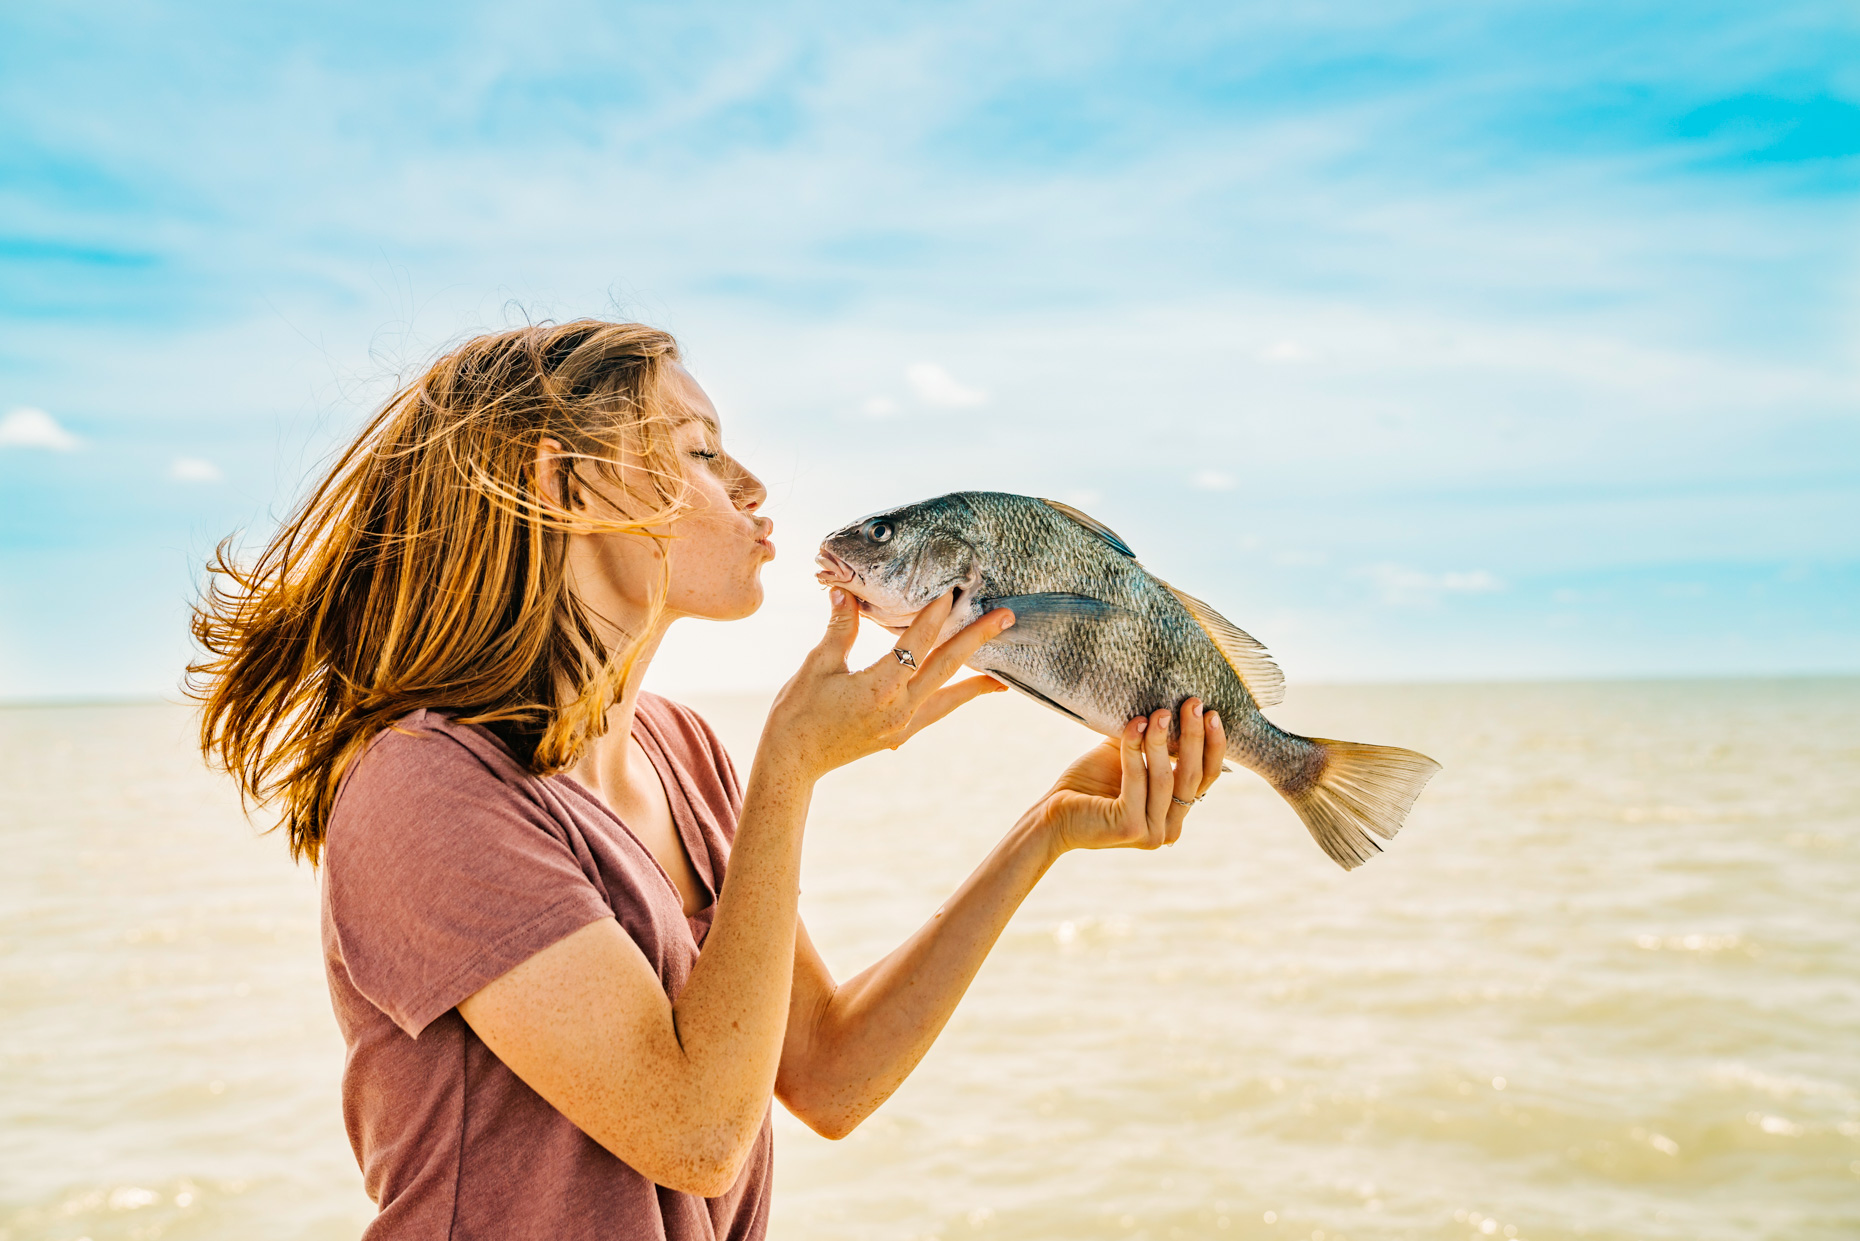 Red haired teen girl pretending to kiss fish